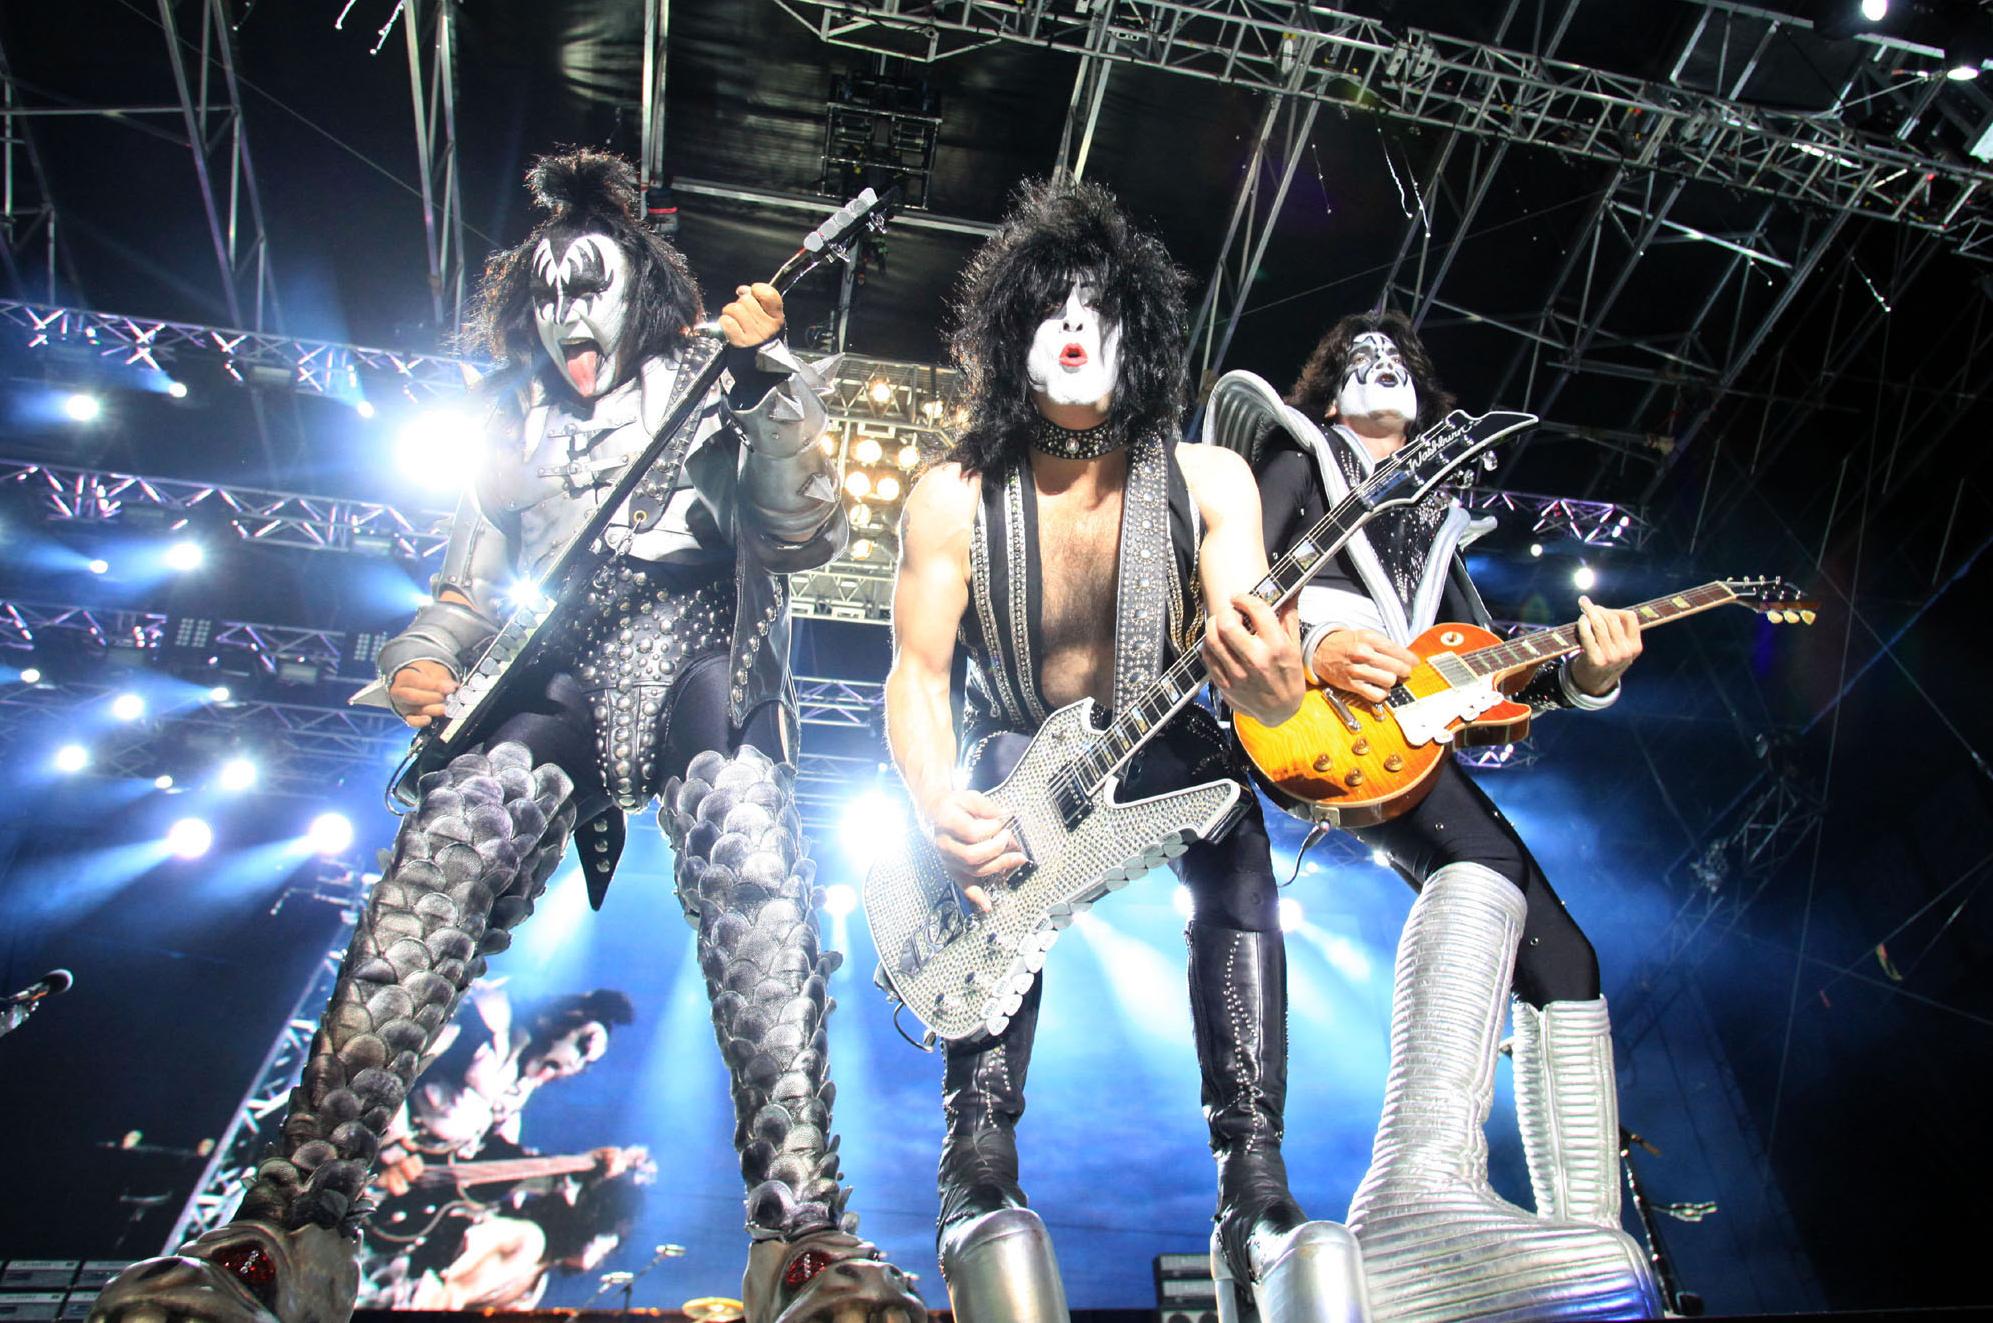 Kiss will play Spokane in February during final tour The SpokesmanReview